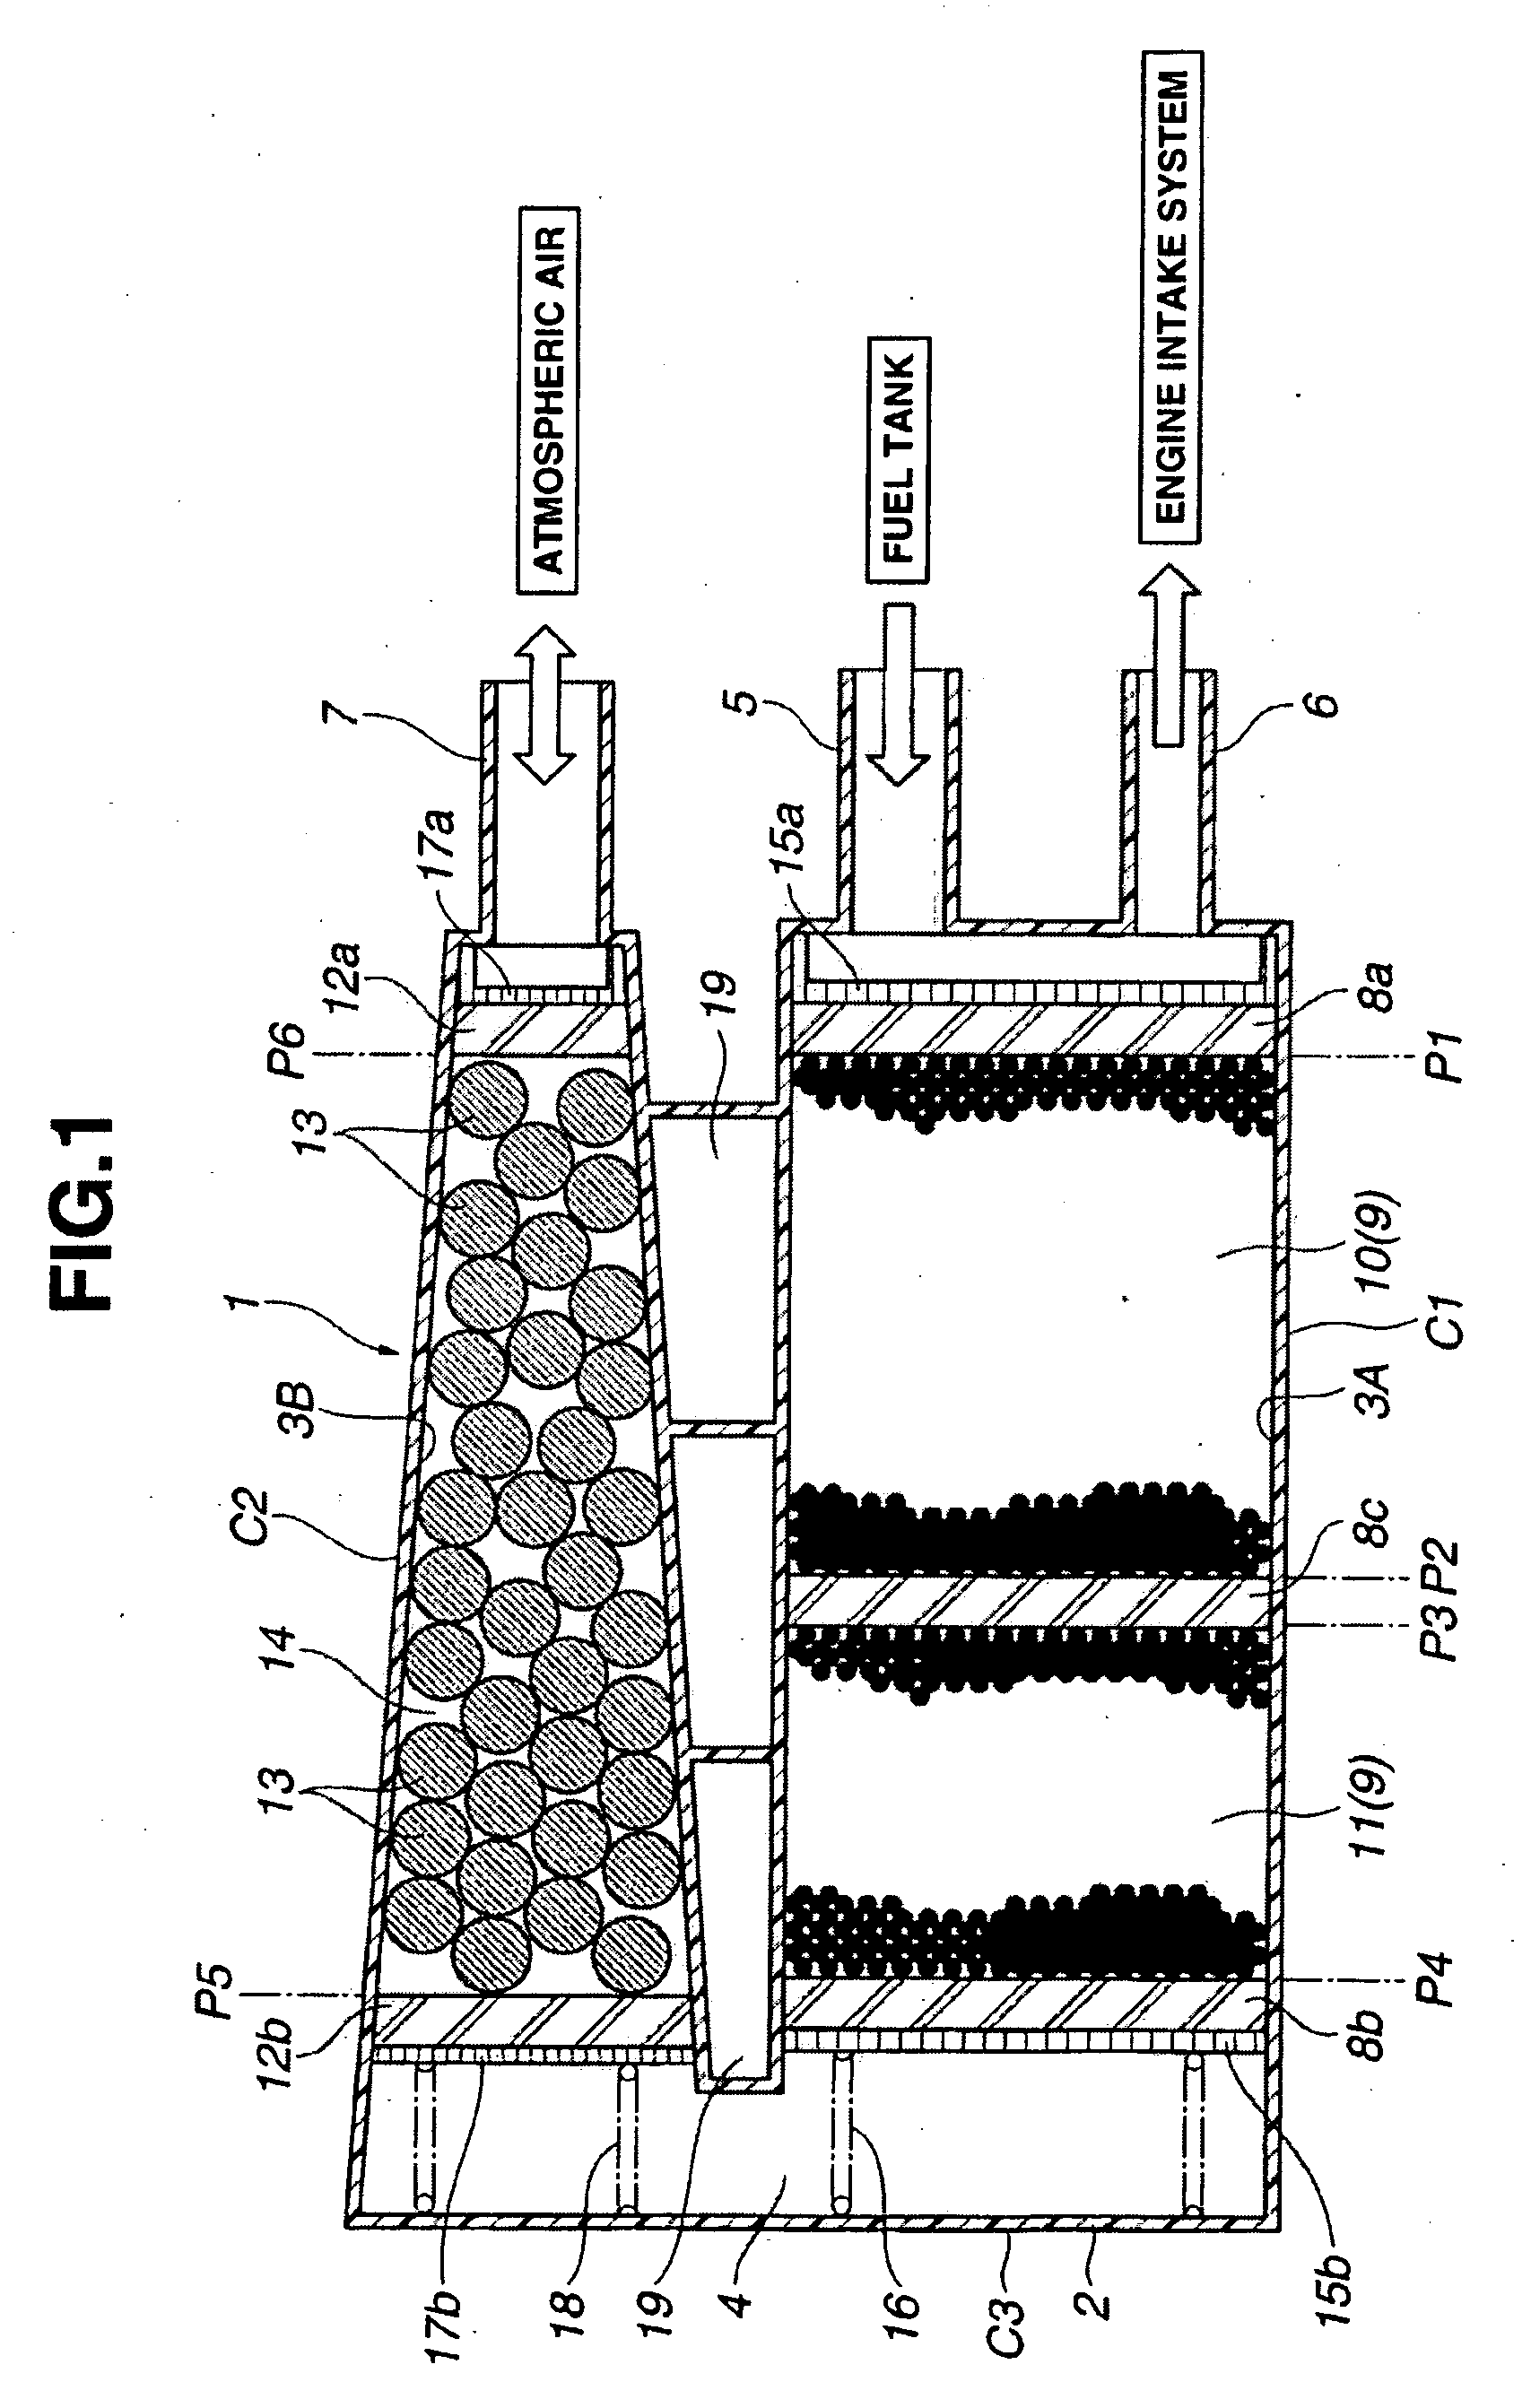 Fuel vapor storage canister, fuel vapor adsorbent for canister, and method of producing fuel vapor adsorbent